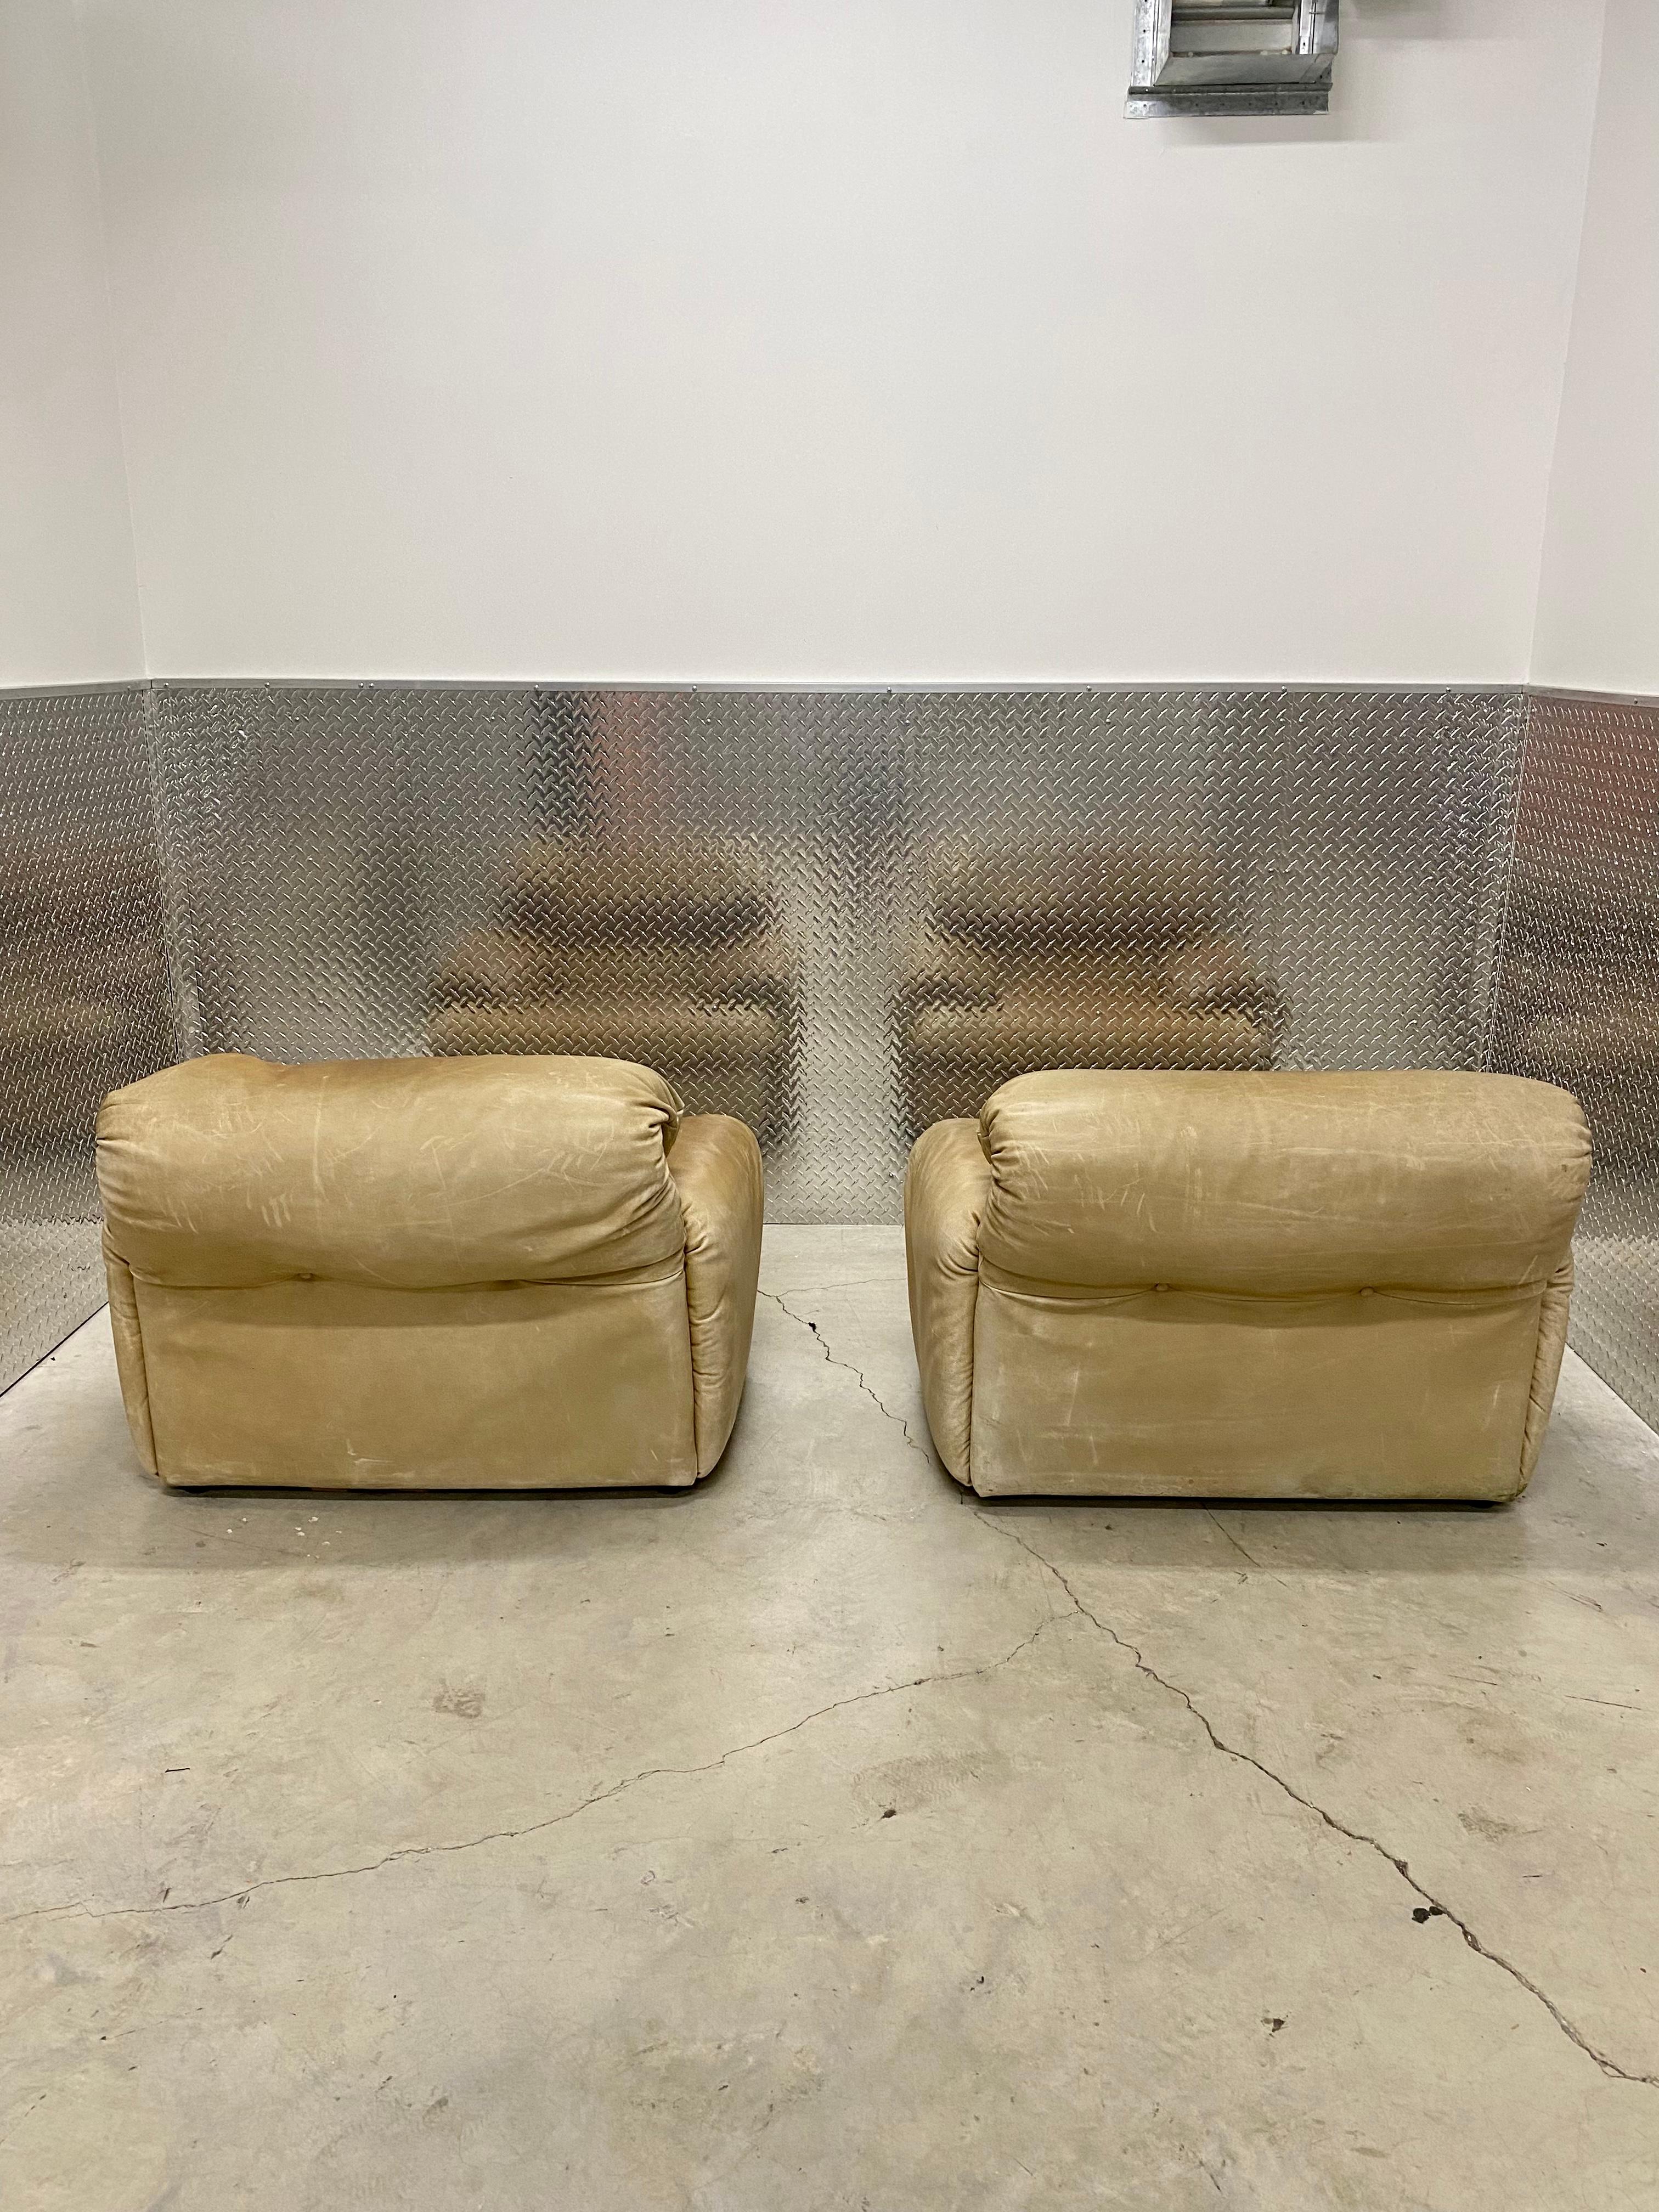 Late 20th Century Attributed to Cassina Rare Cube Maralunga Leather Chairs and Ottoman, Set of 3 For Sale